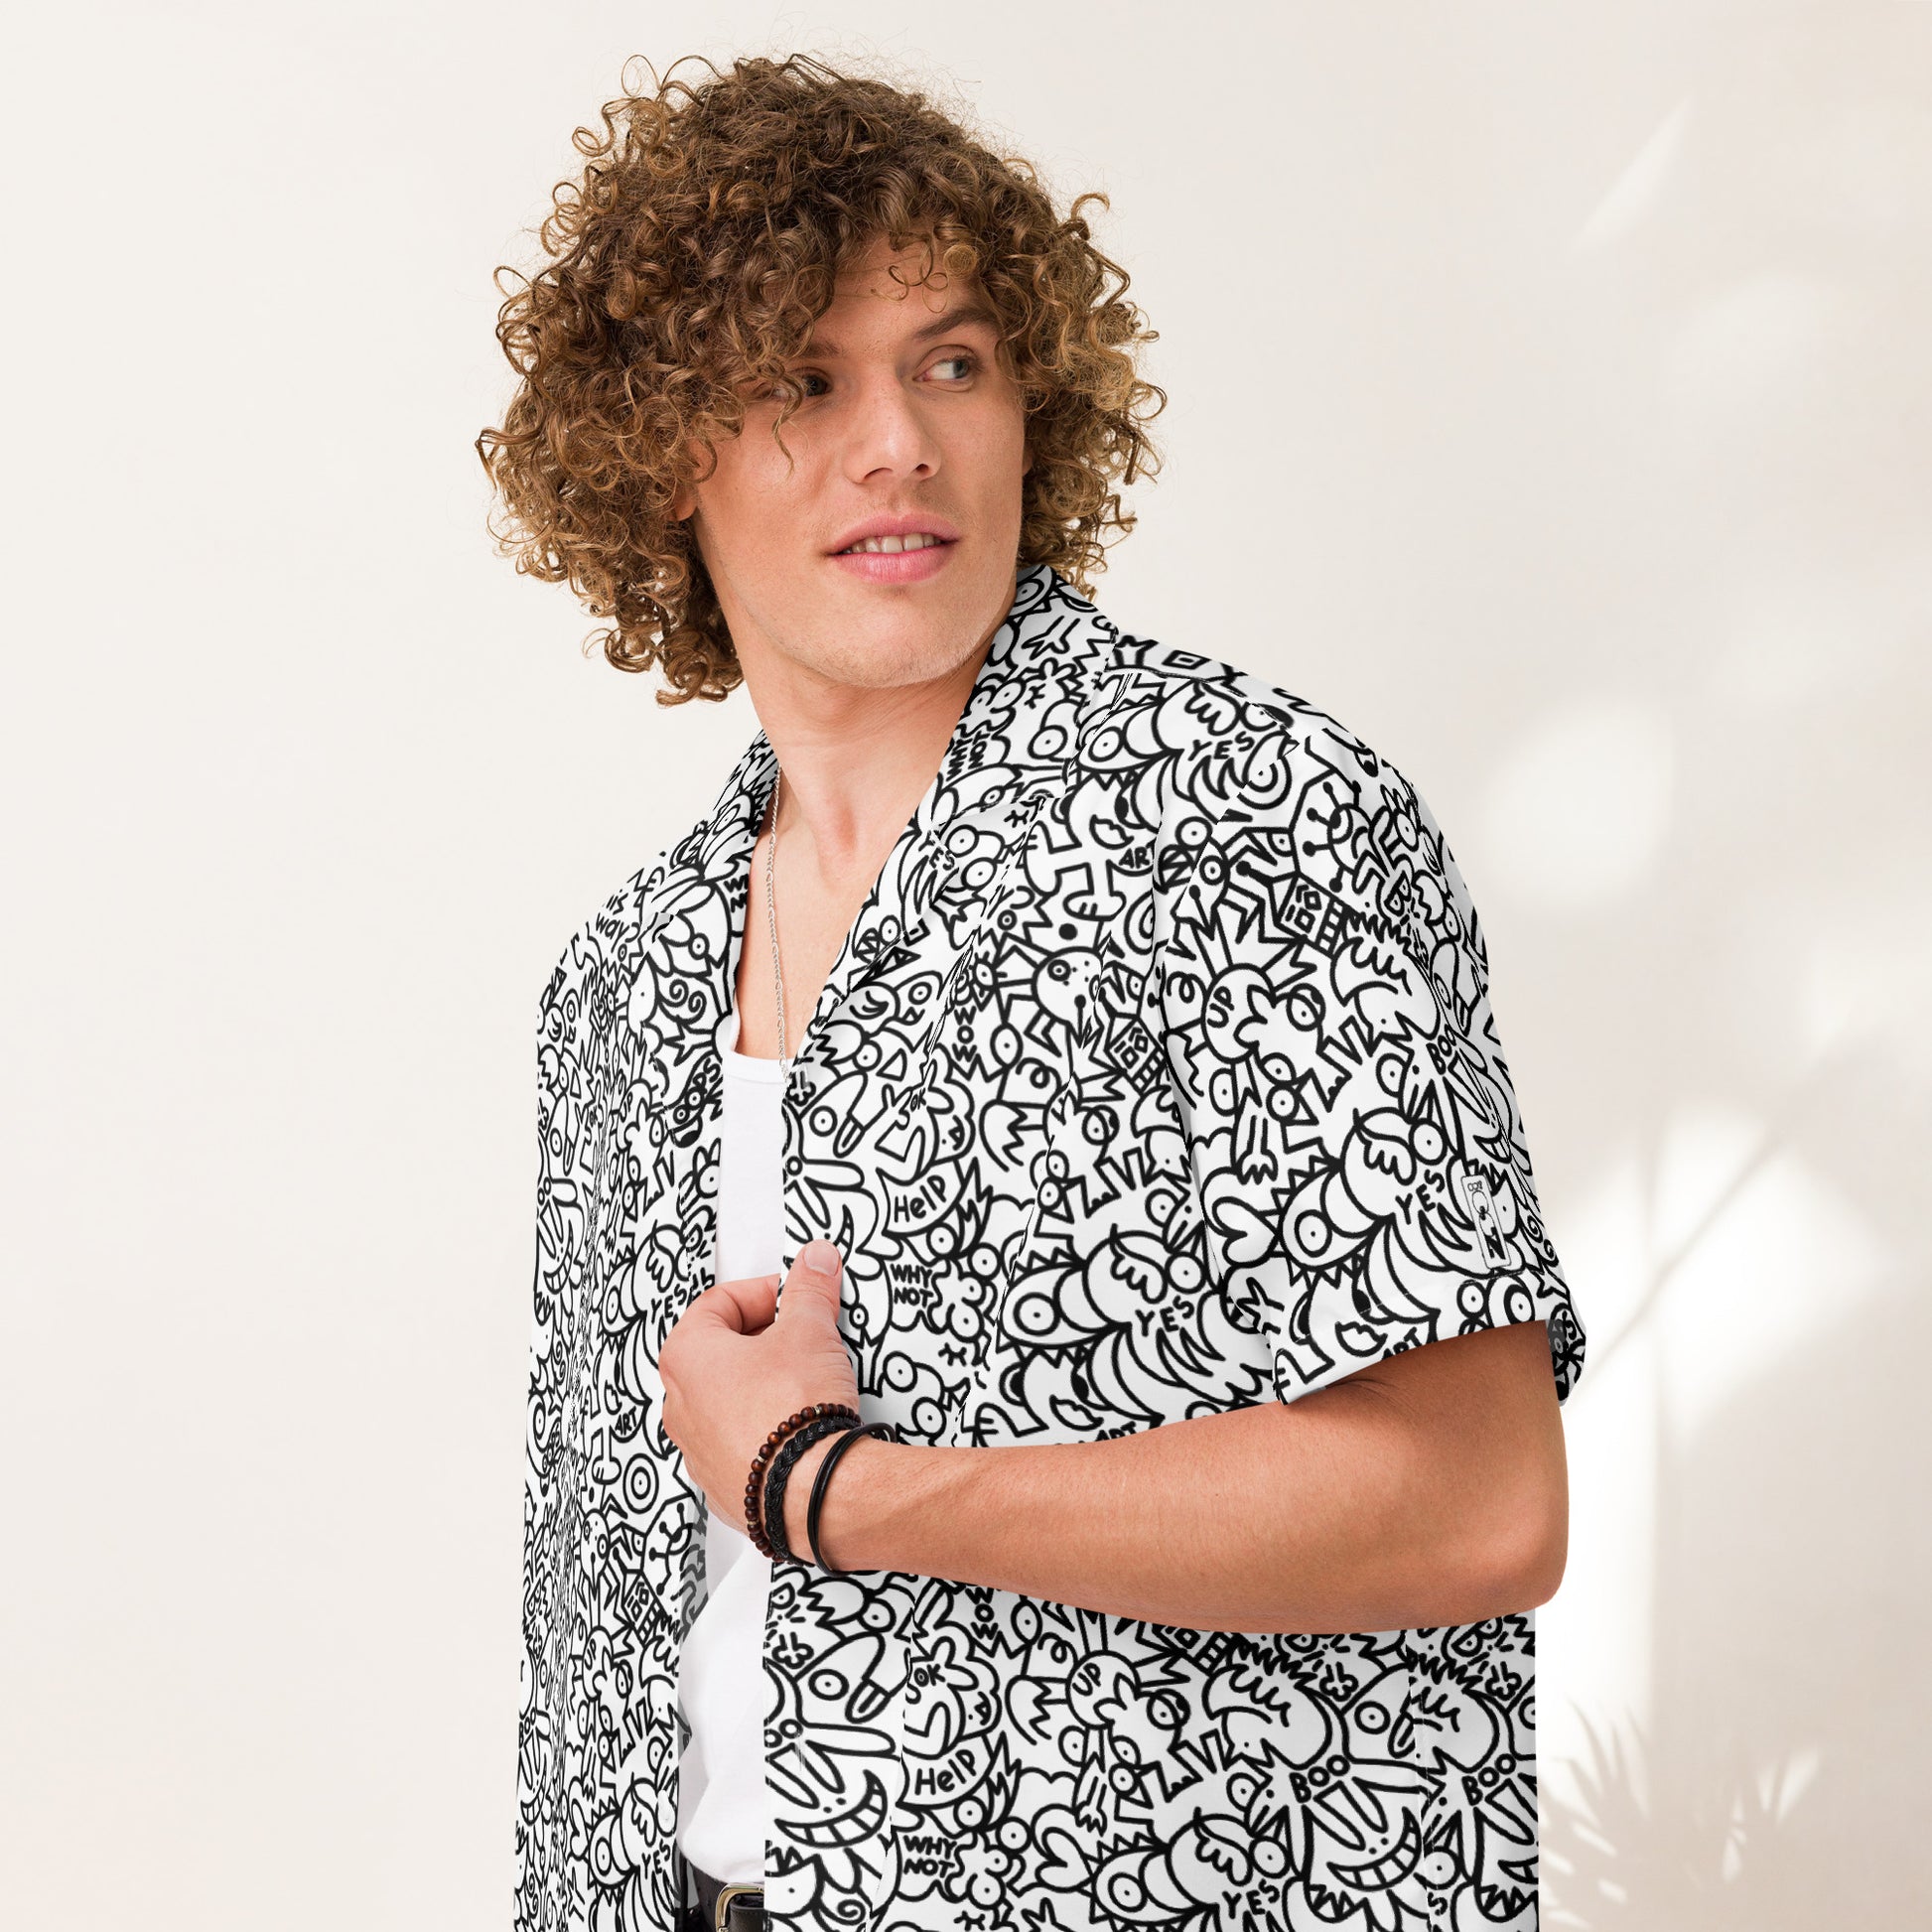 The Playful Power of Great Doodles for Bold People - Unisex button shirt. Lifestyle